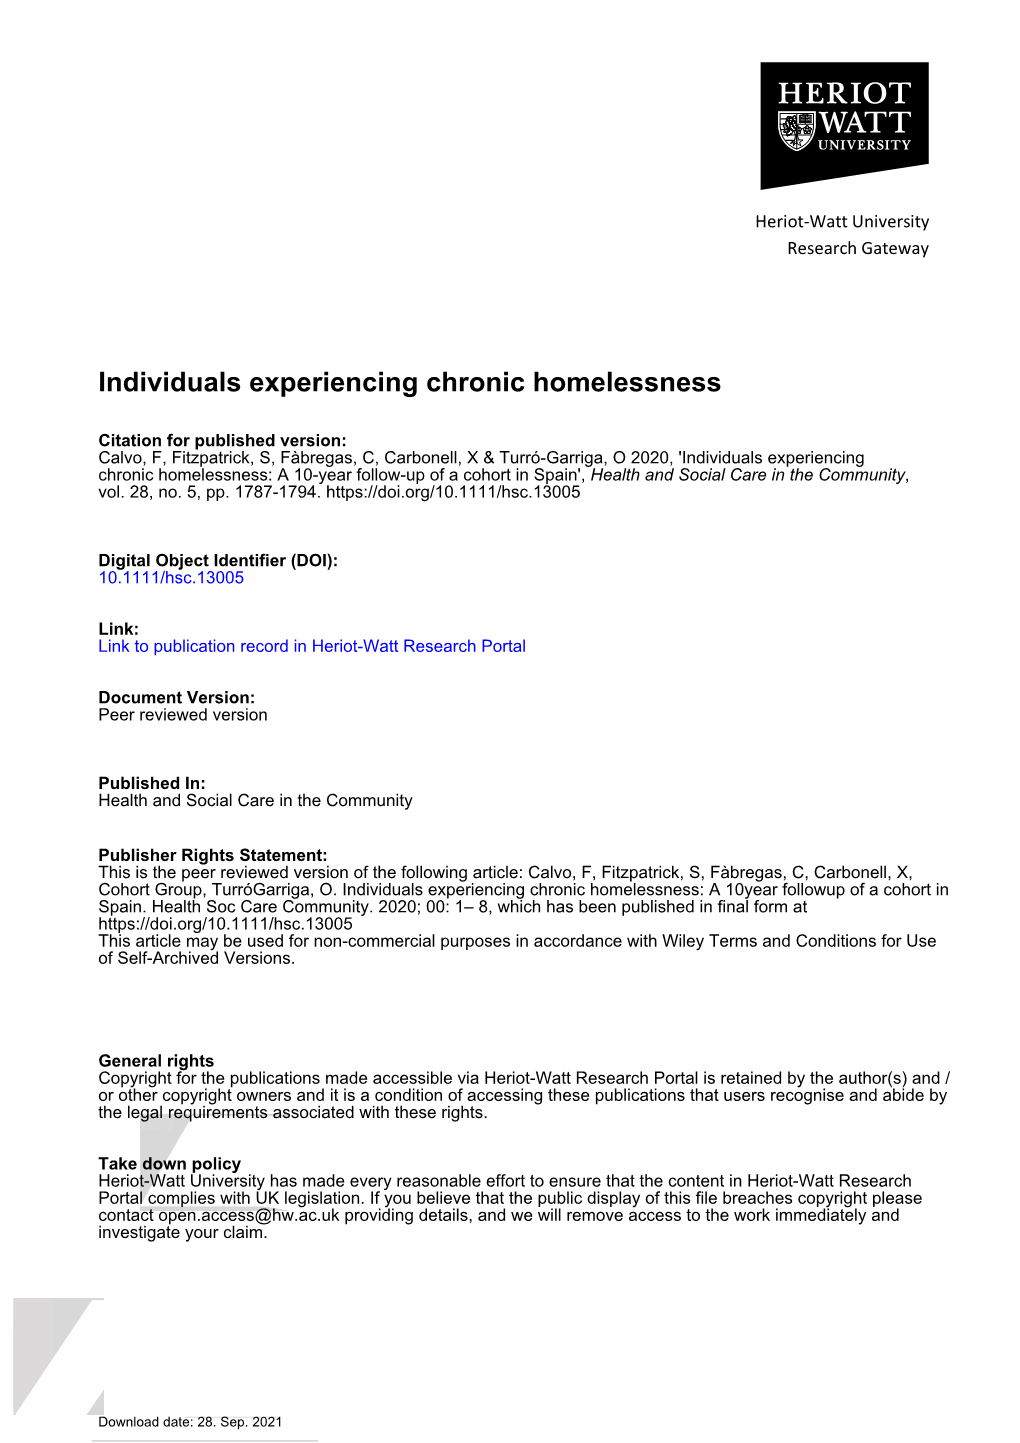 Individuals Experiencing Chronic Homelessness